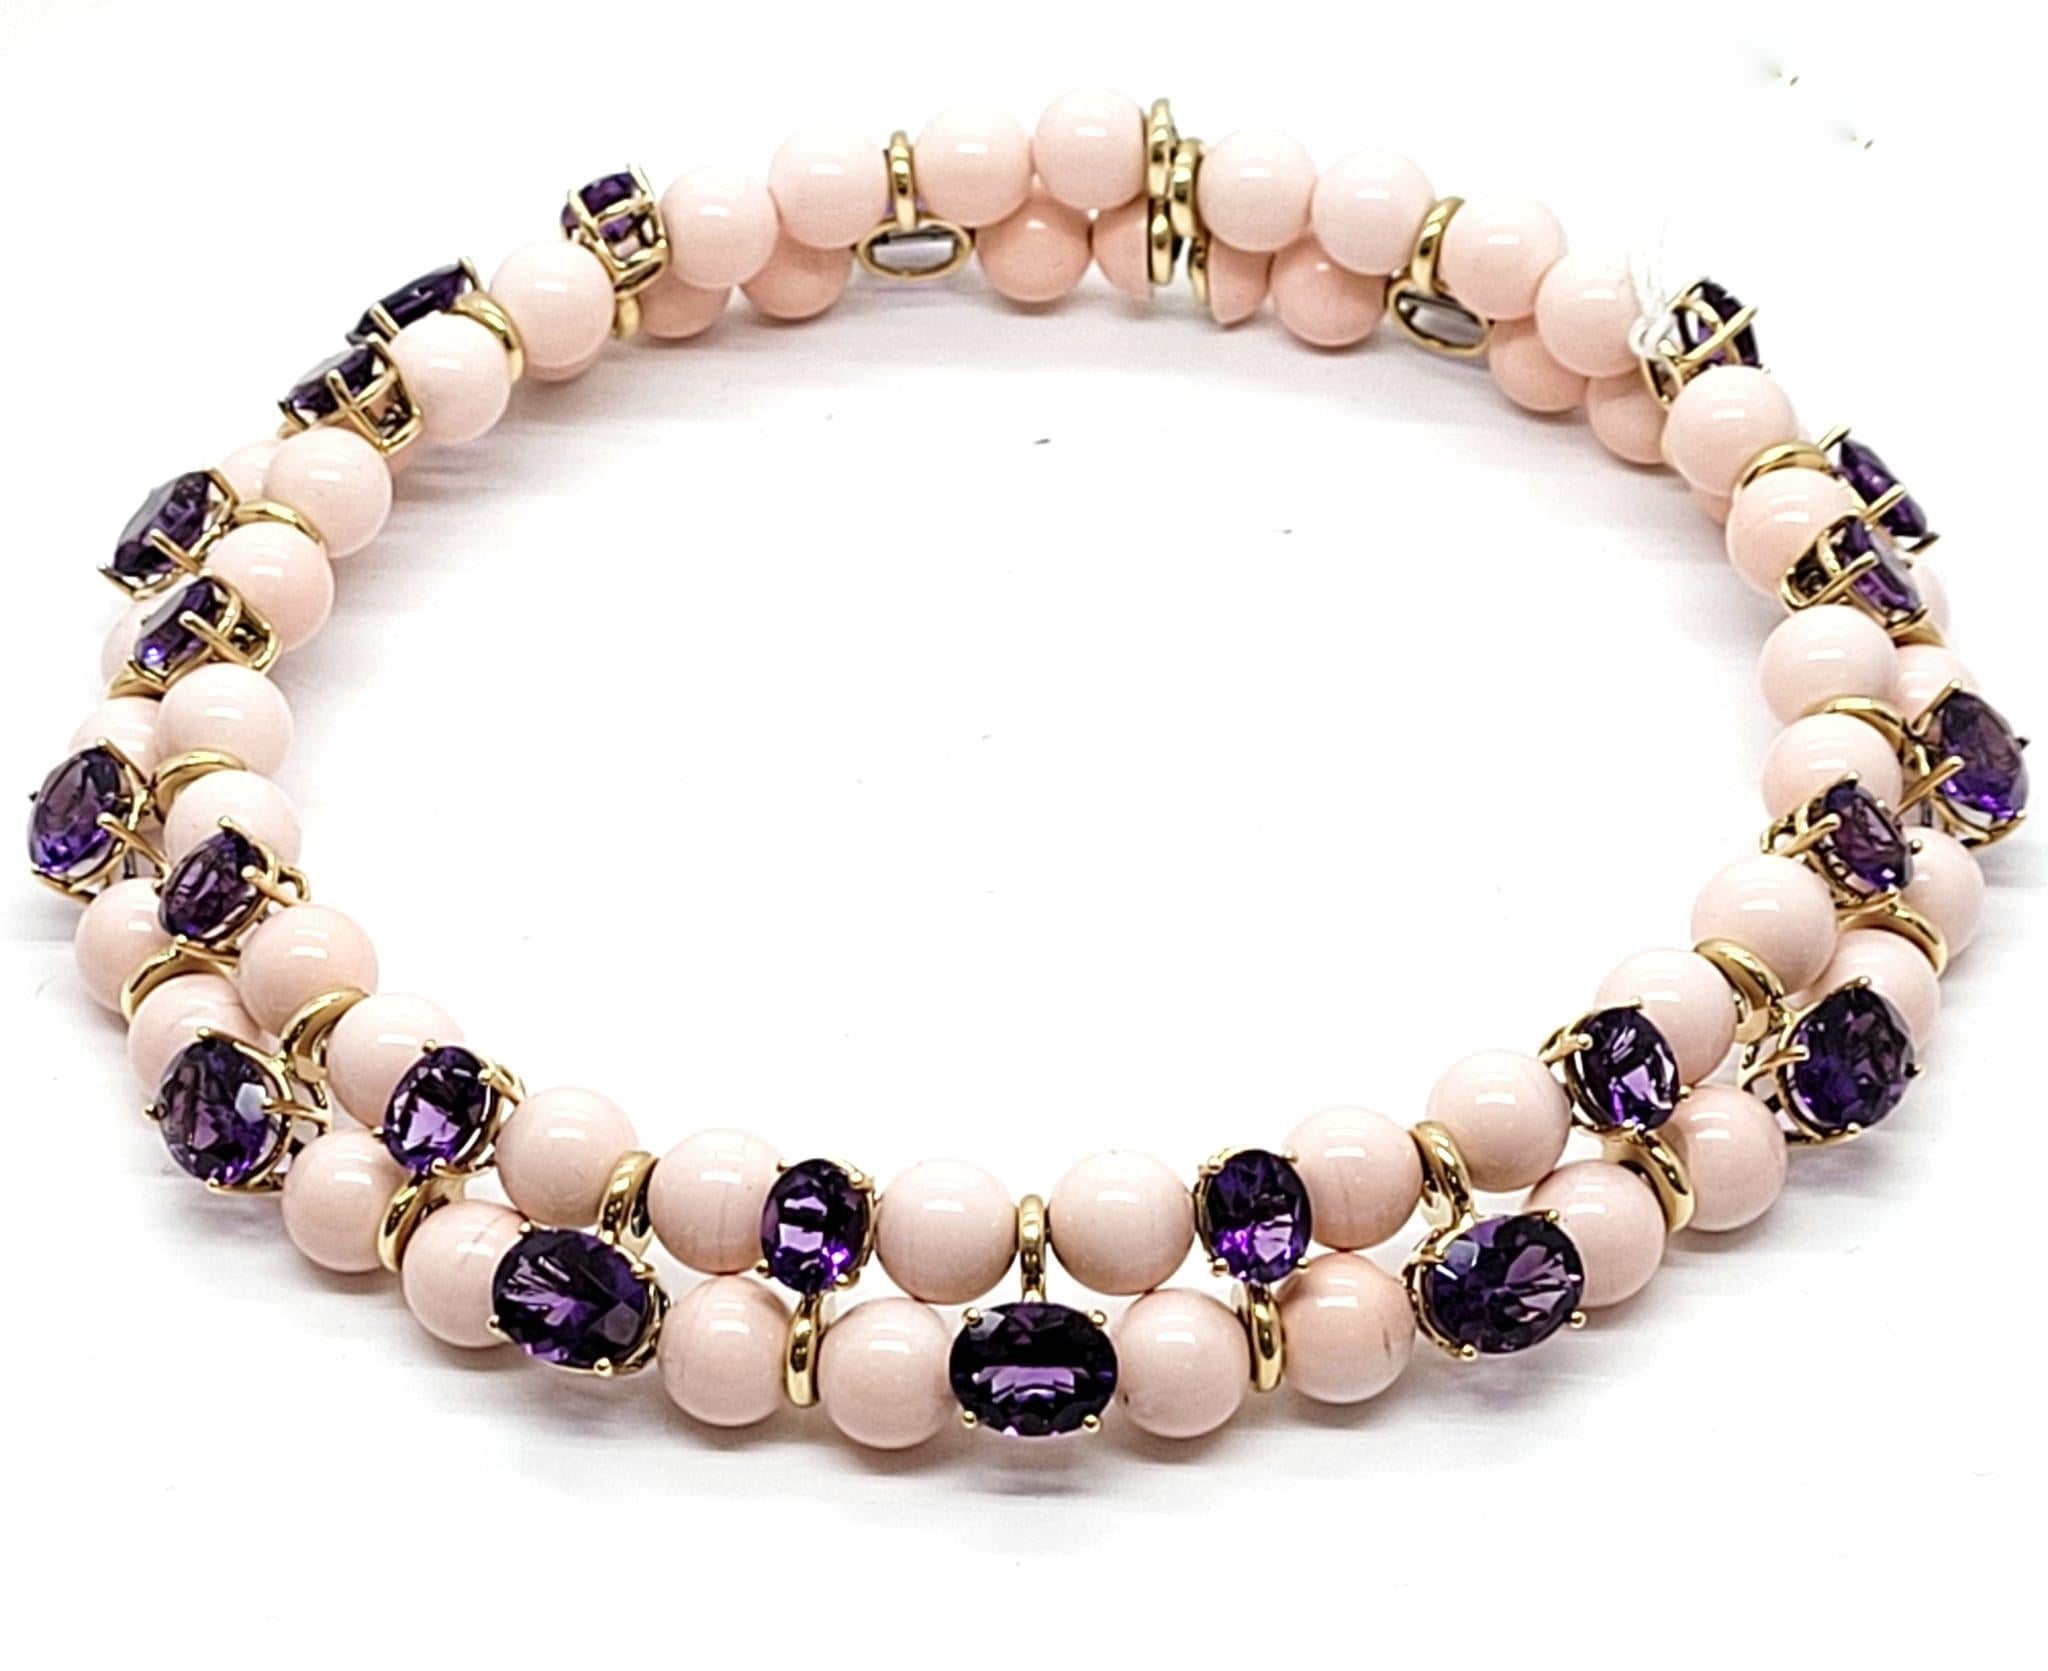 Contemporary Andreoli 49.94 Carat Amethyst Coral 18 Karat Yellow Gold Choker Necklace For Sale